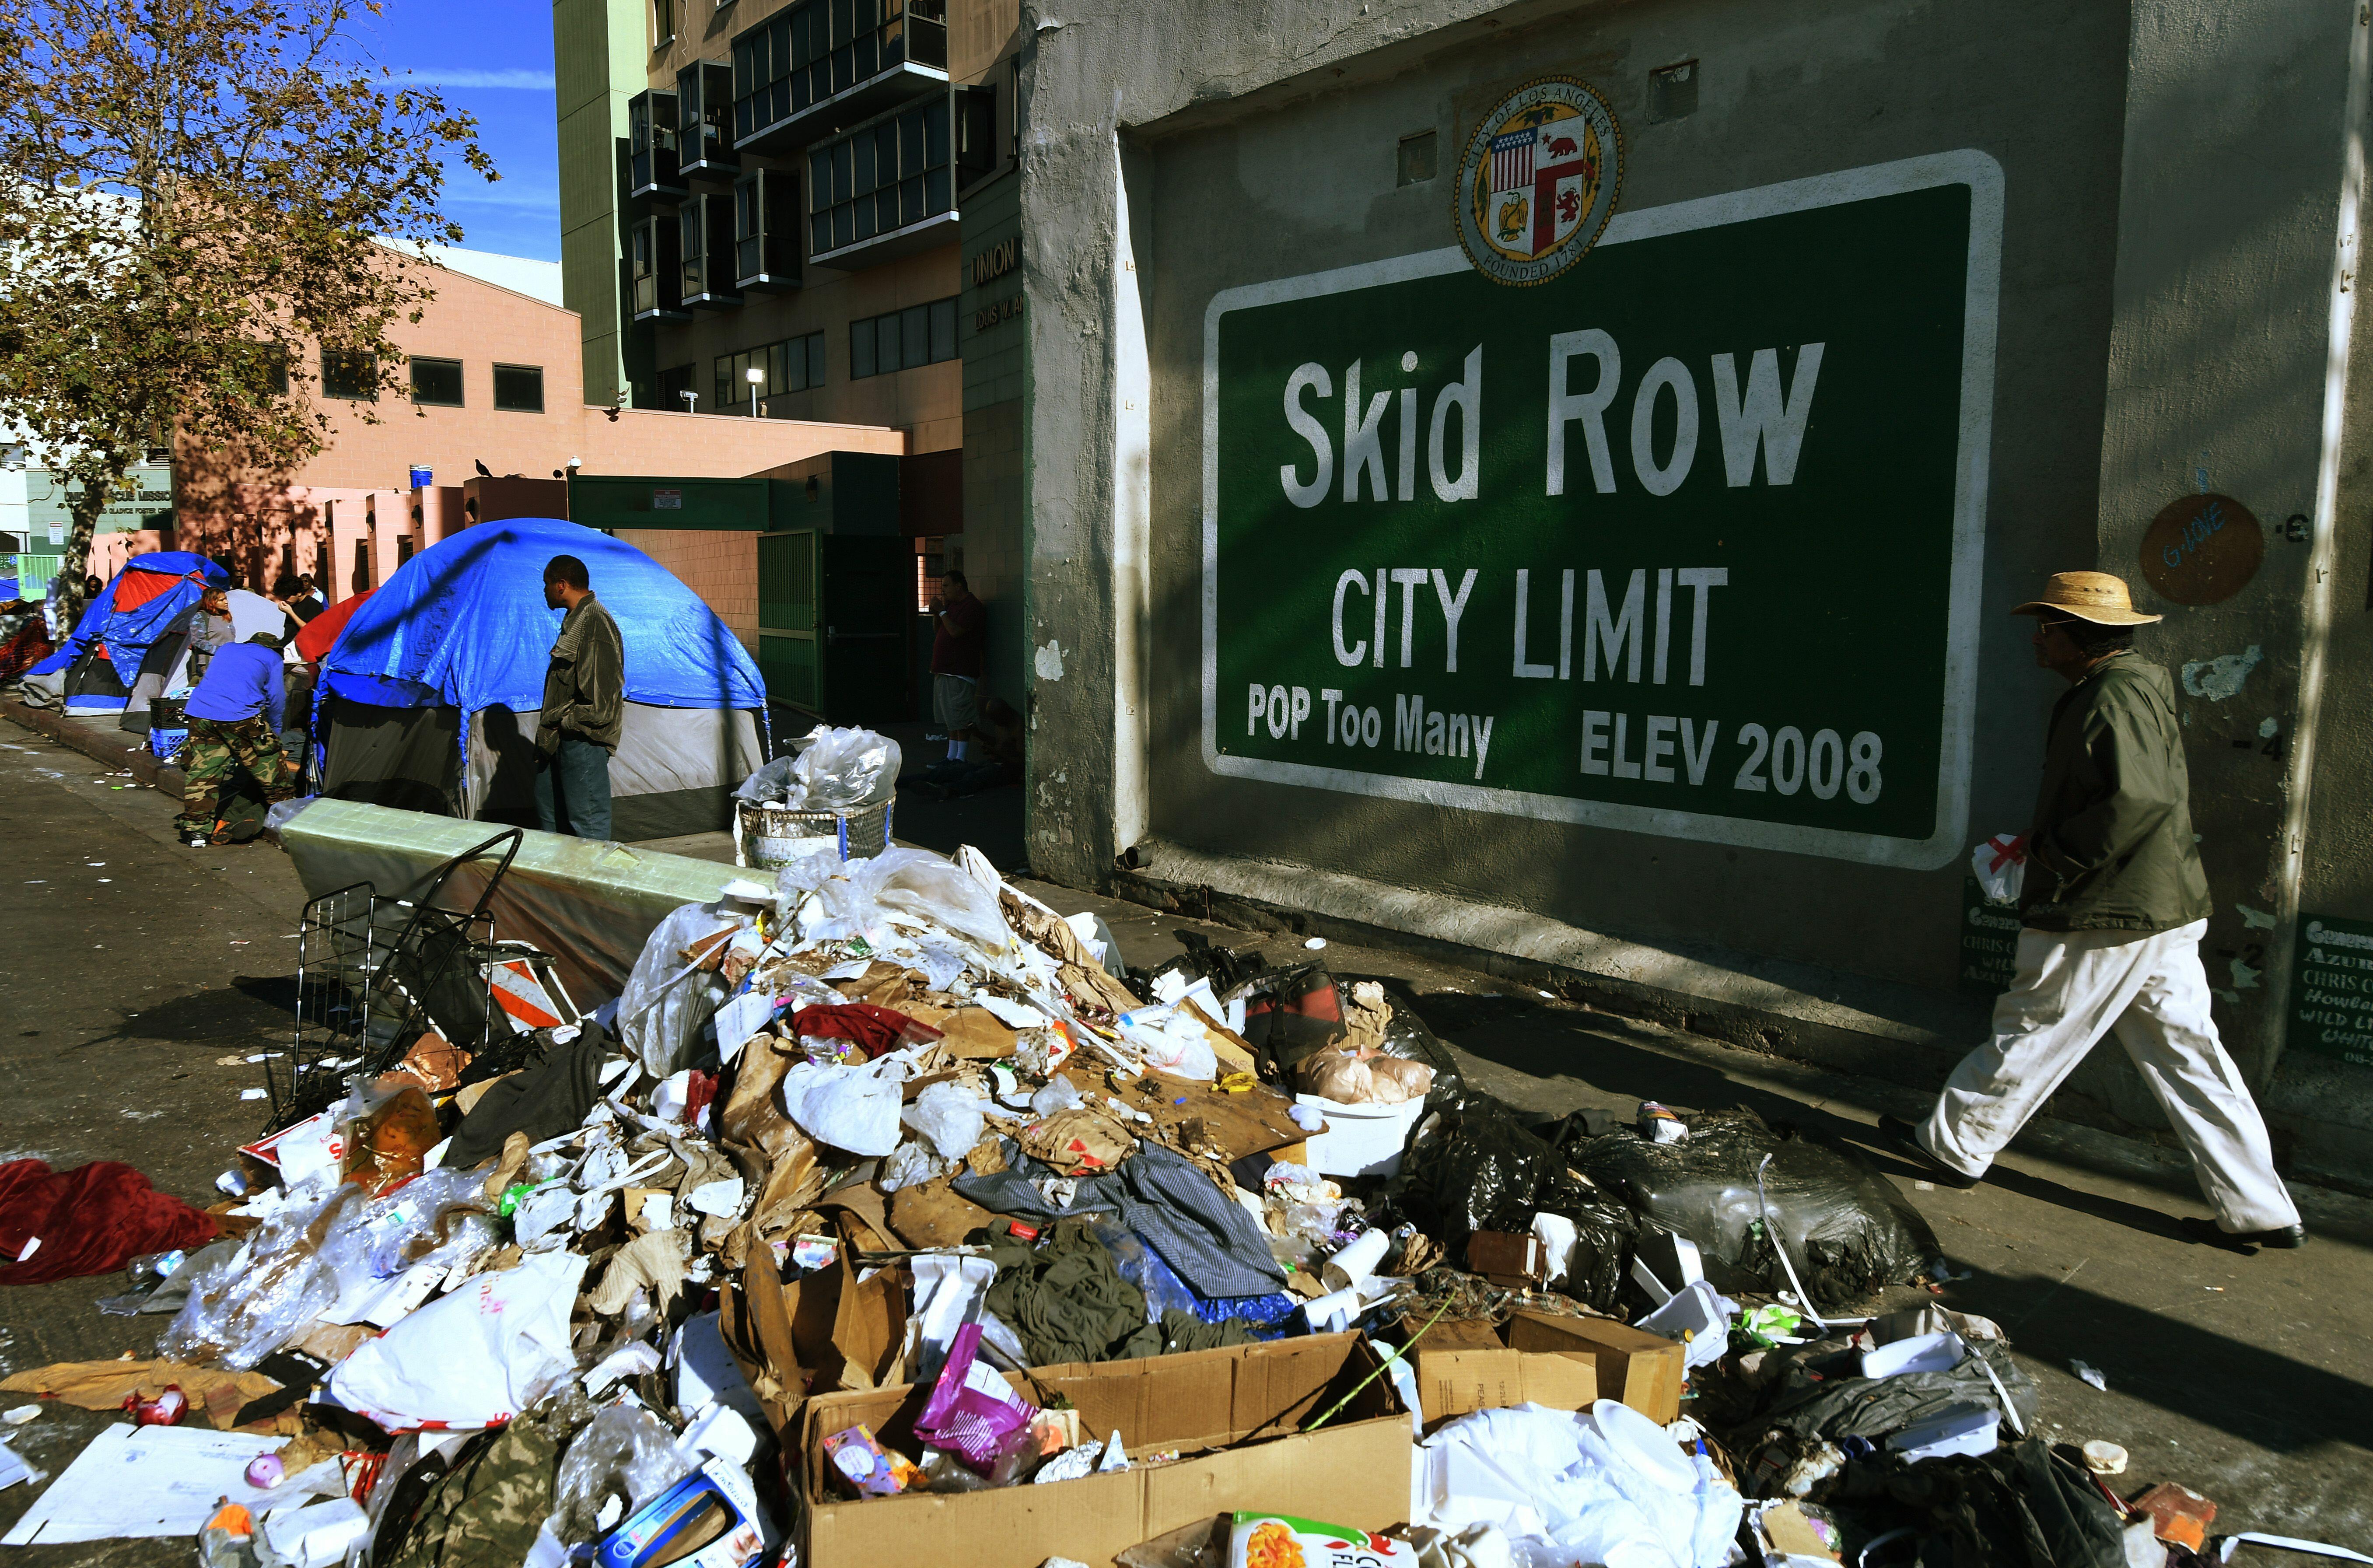 LA Will Now Pay Homeless $15 an Hour To Clean Up Skid Row | KFI AM 640